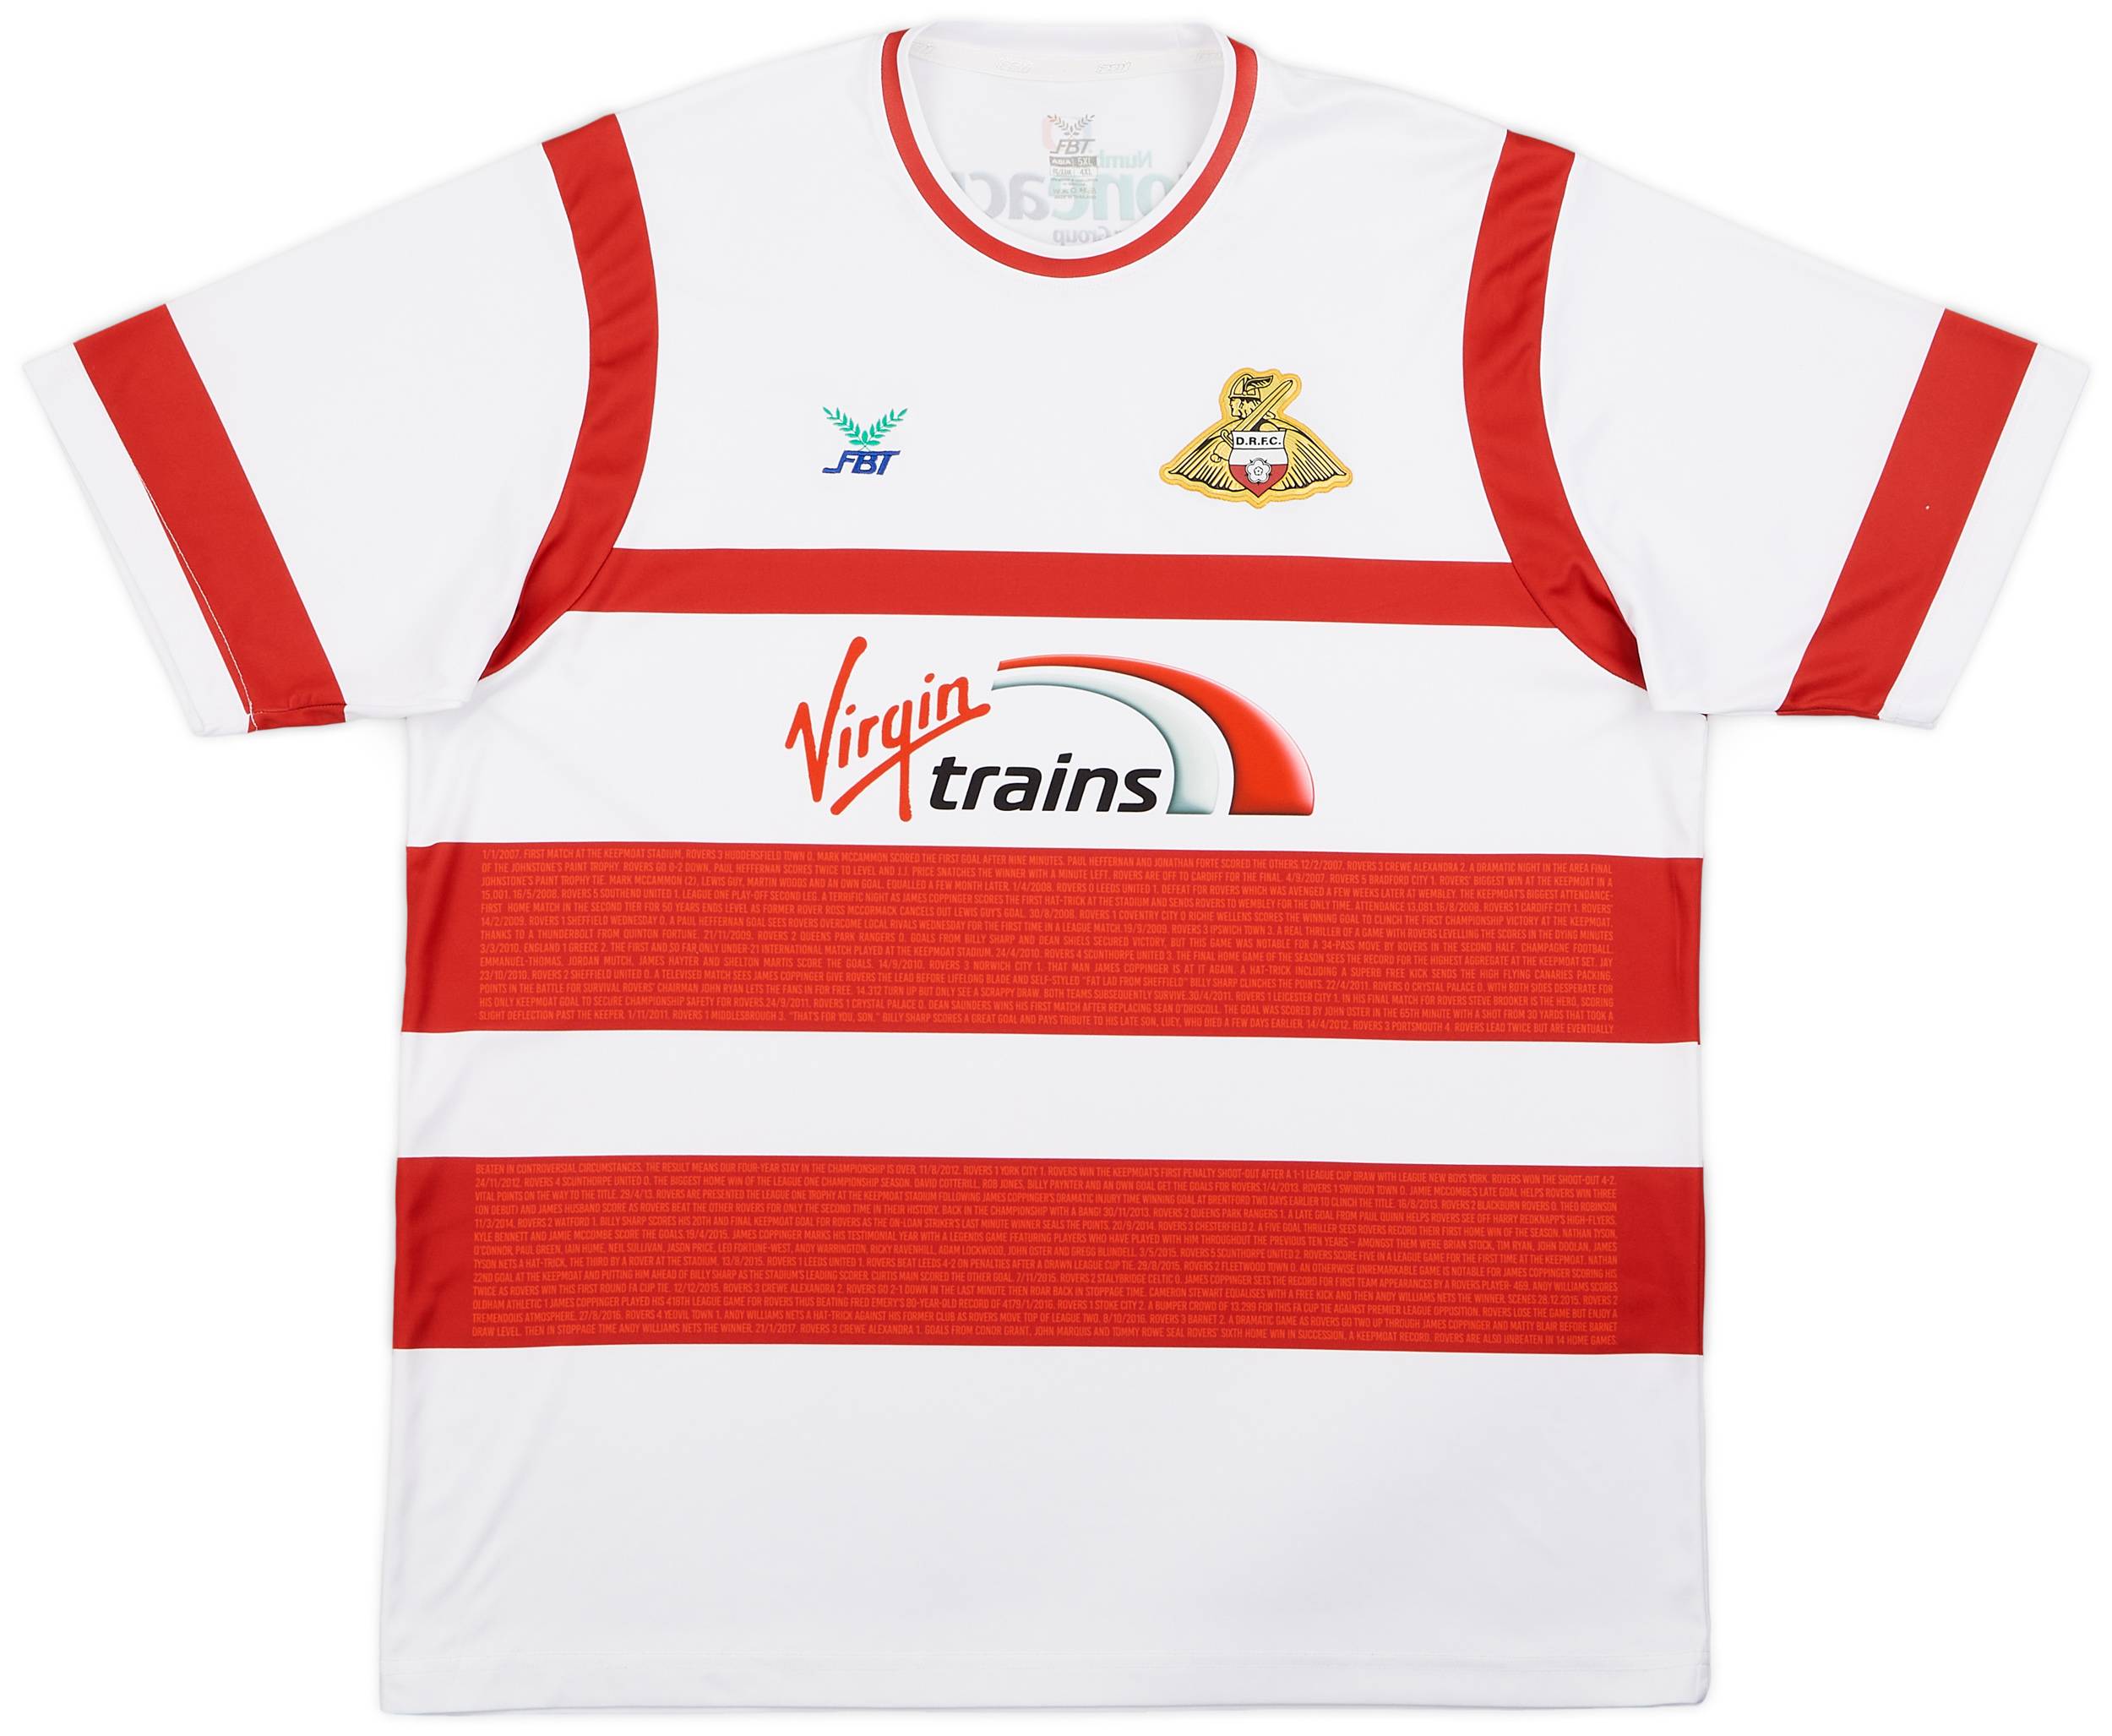 2017-18 Doncaster Rovers Home Shirt - 9/10 - (4XL)